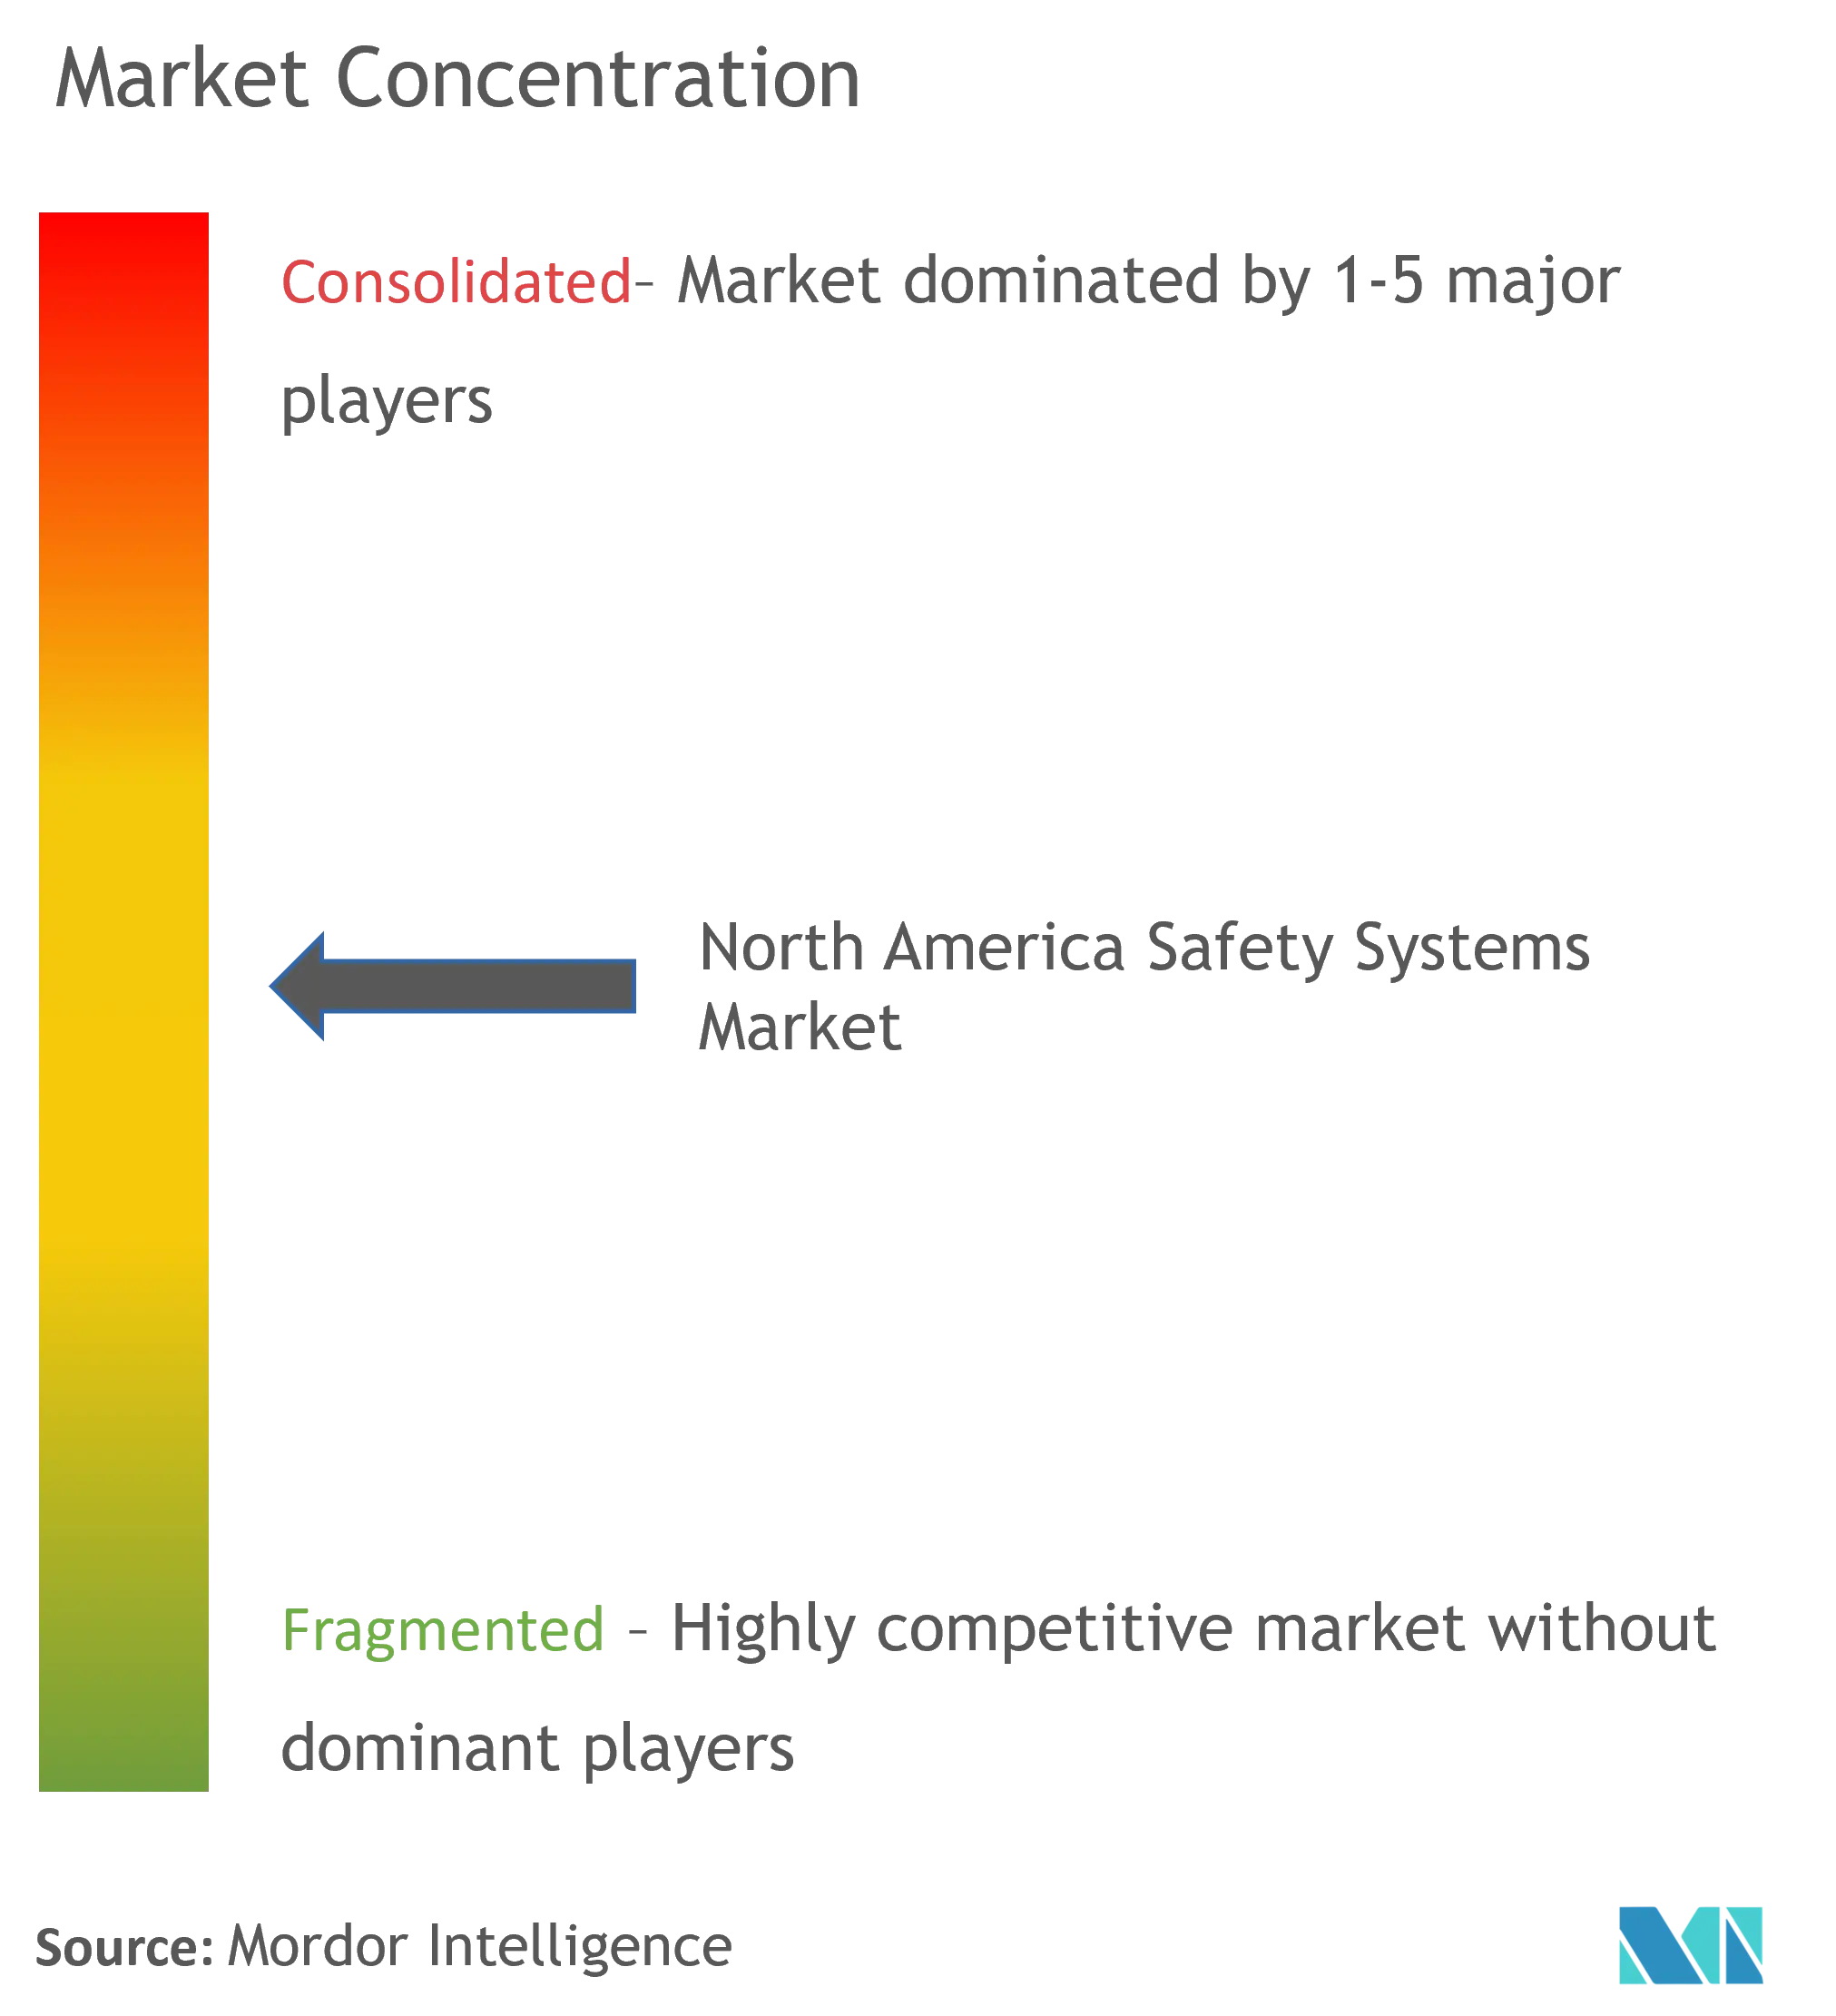 North America Safety Systems Market Concentration